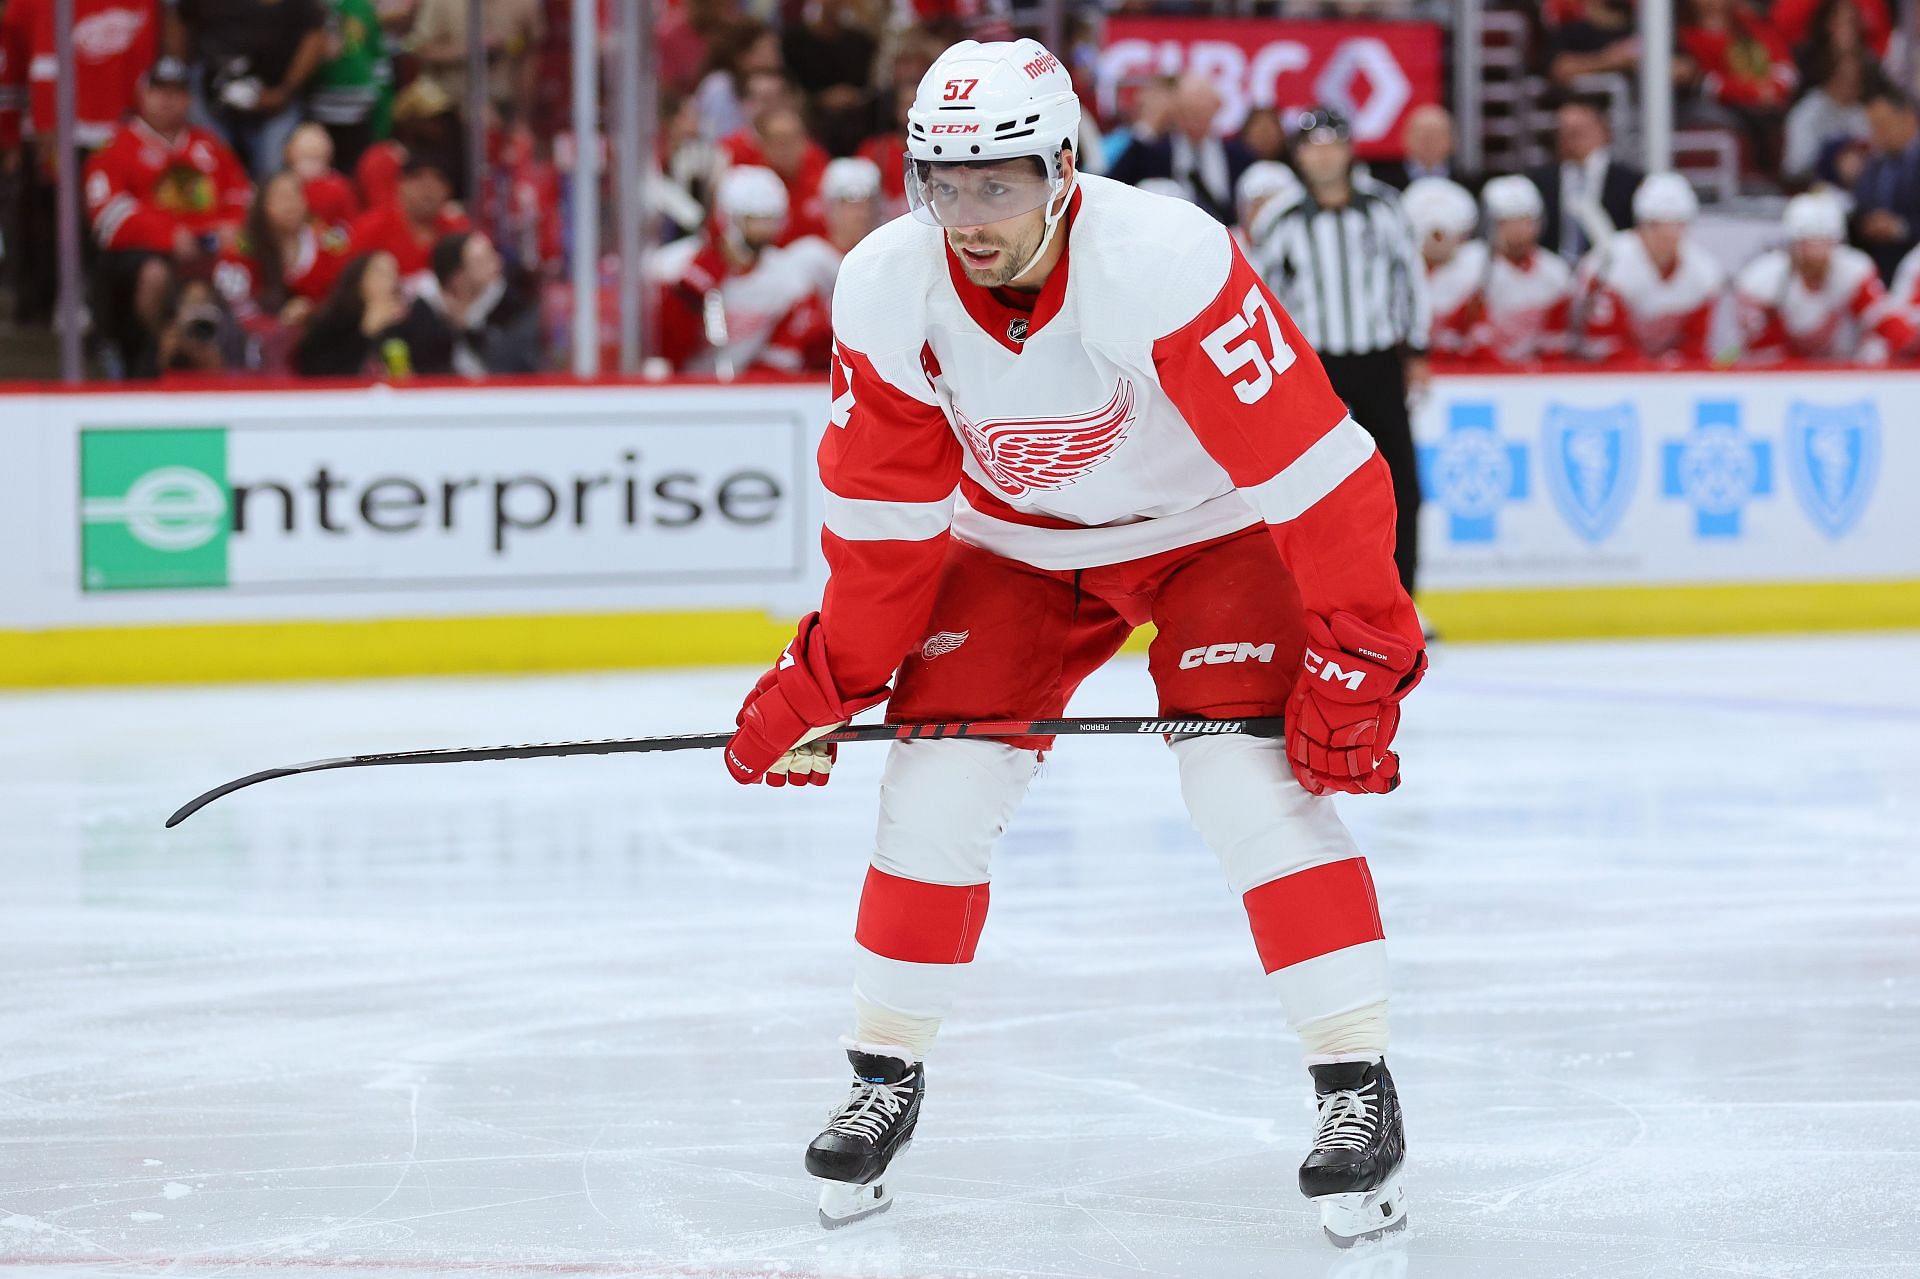 Red Wings forward Perron suspended 6 games for cross-check on Ottawa's Zub